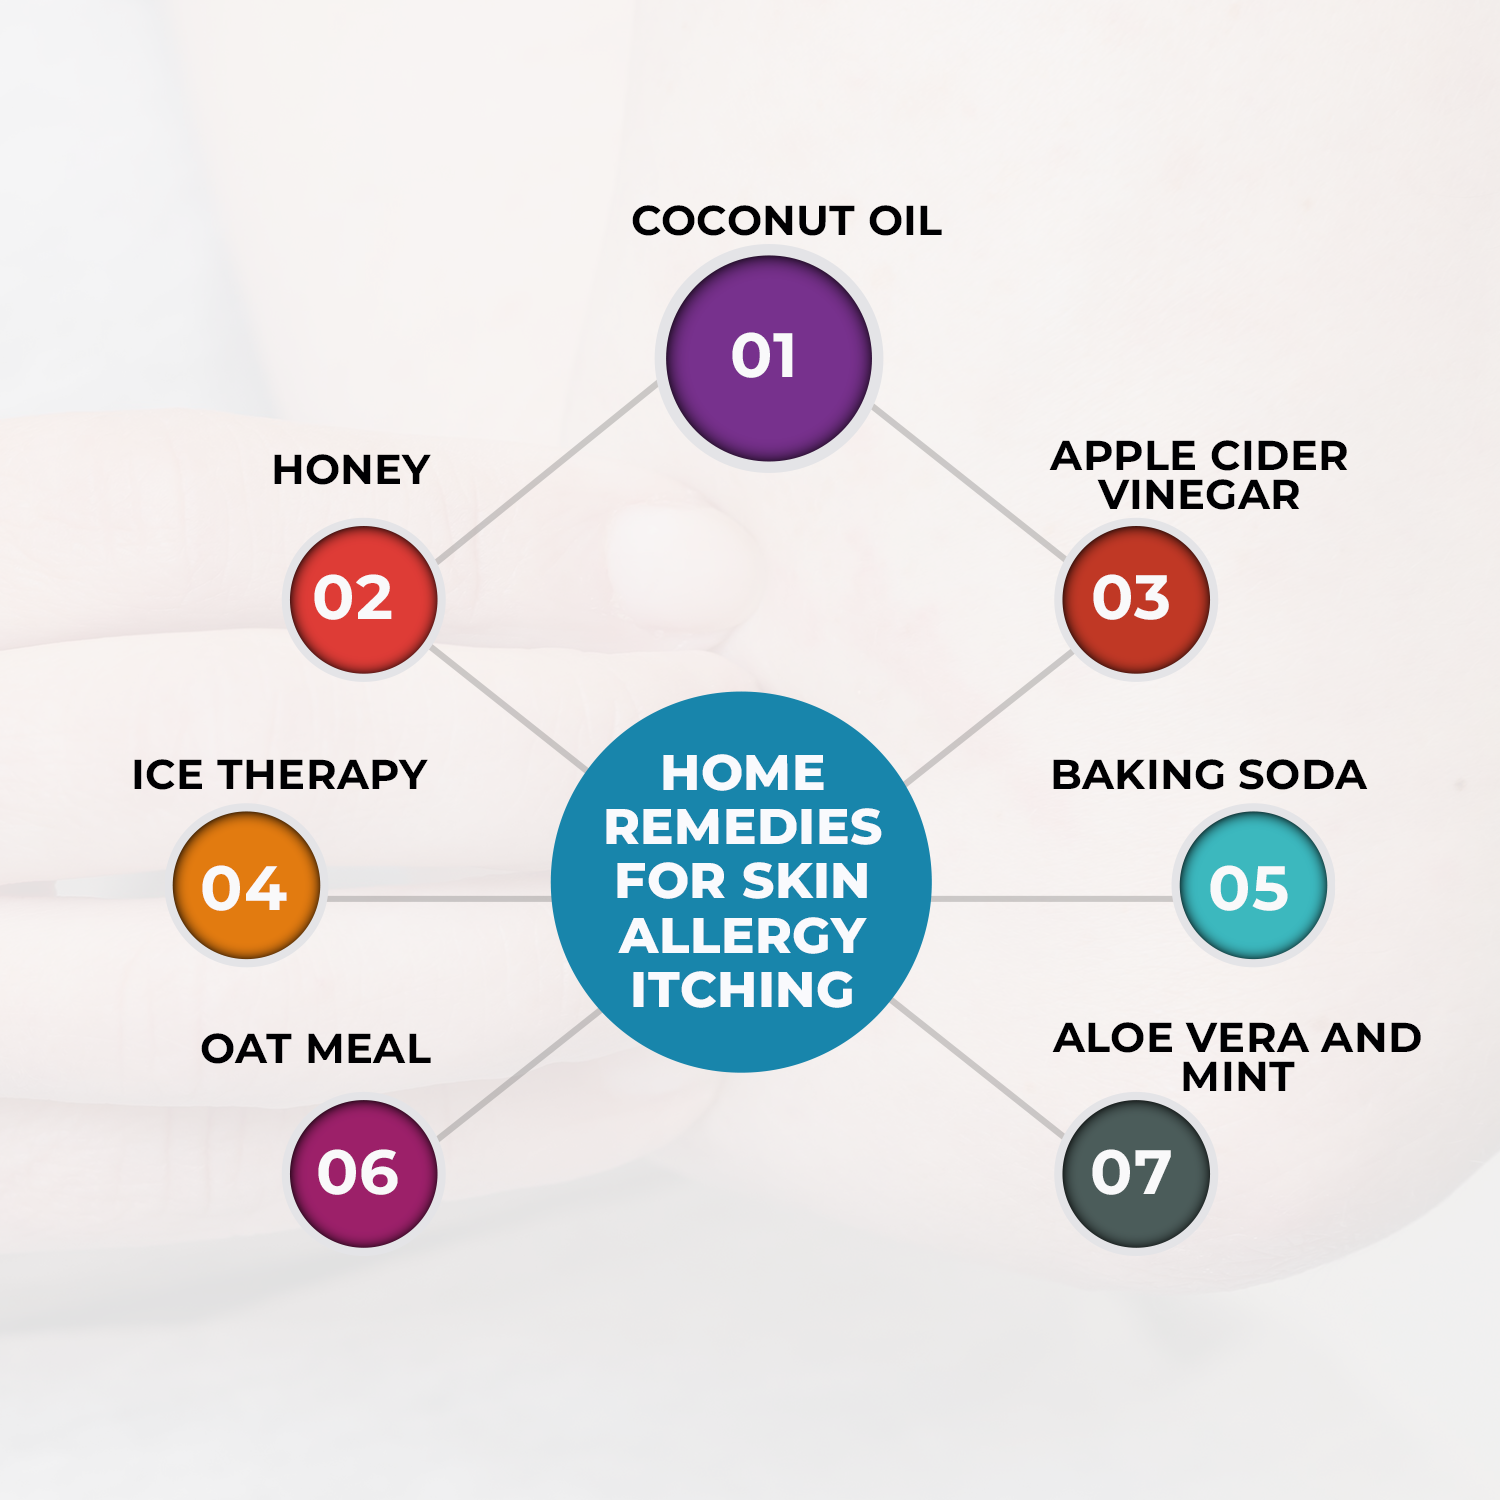 Home Remedies For Skin Allergy Itching